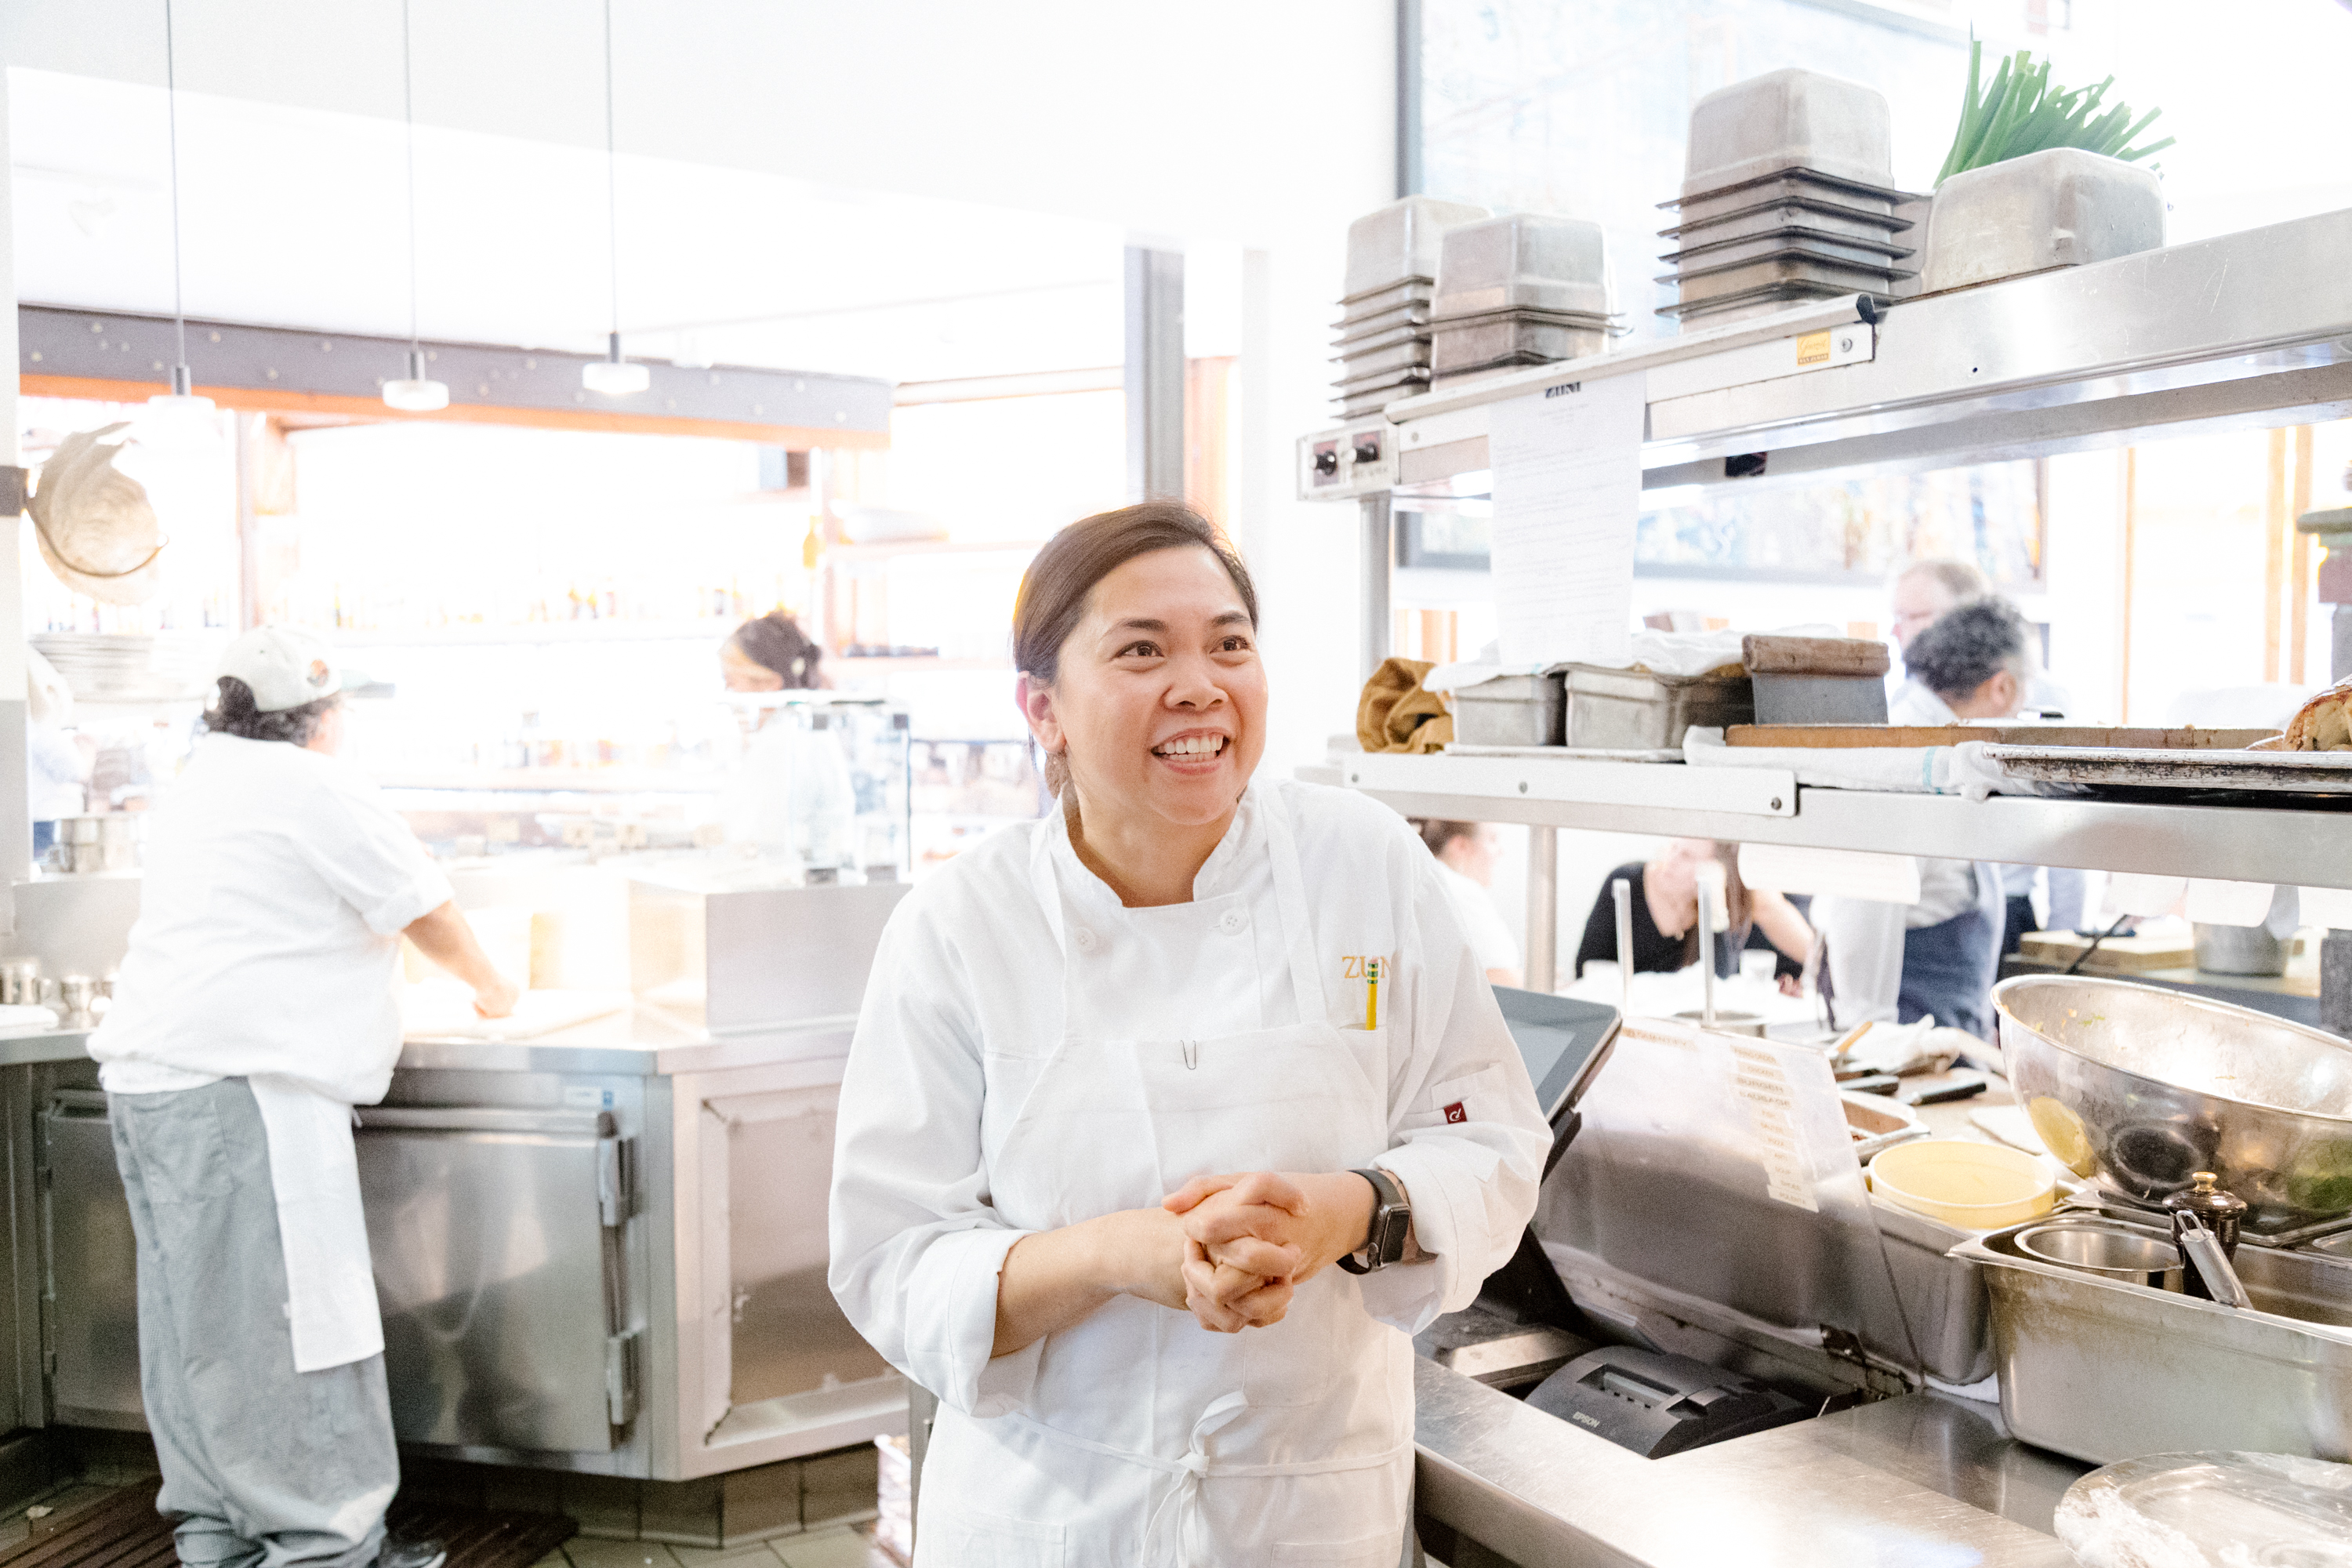 A chef smiles whiles clasping her hands in the back on an active kitchen.